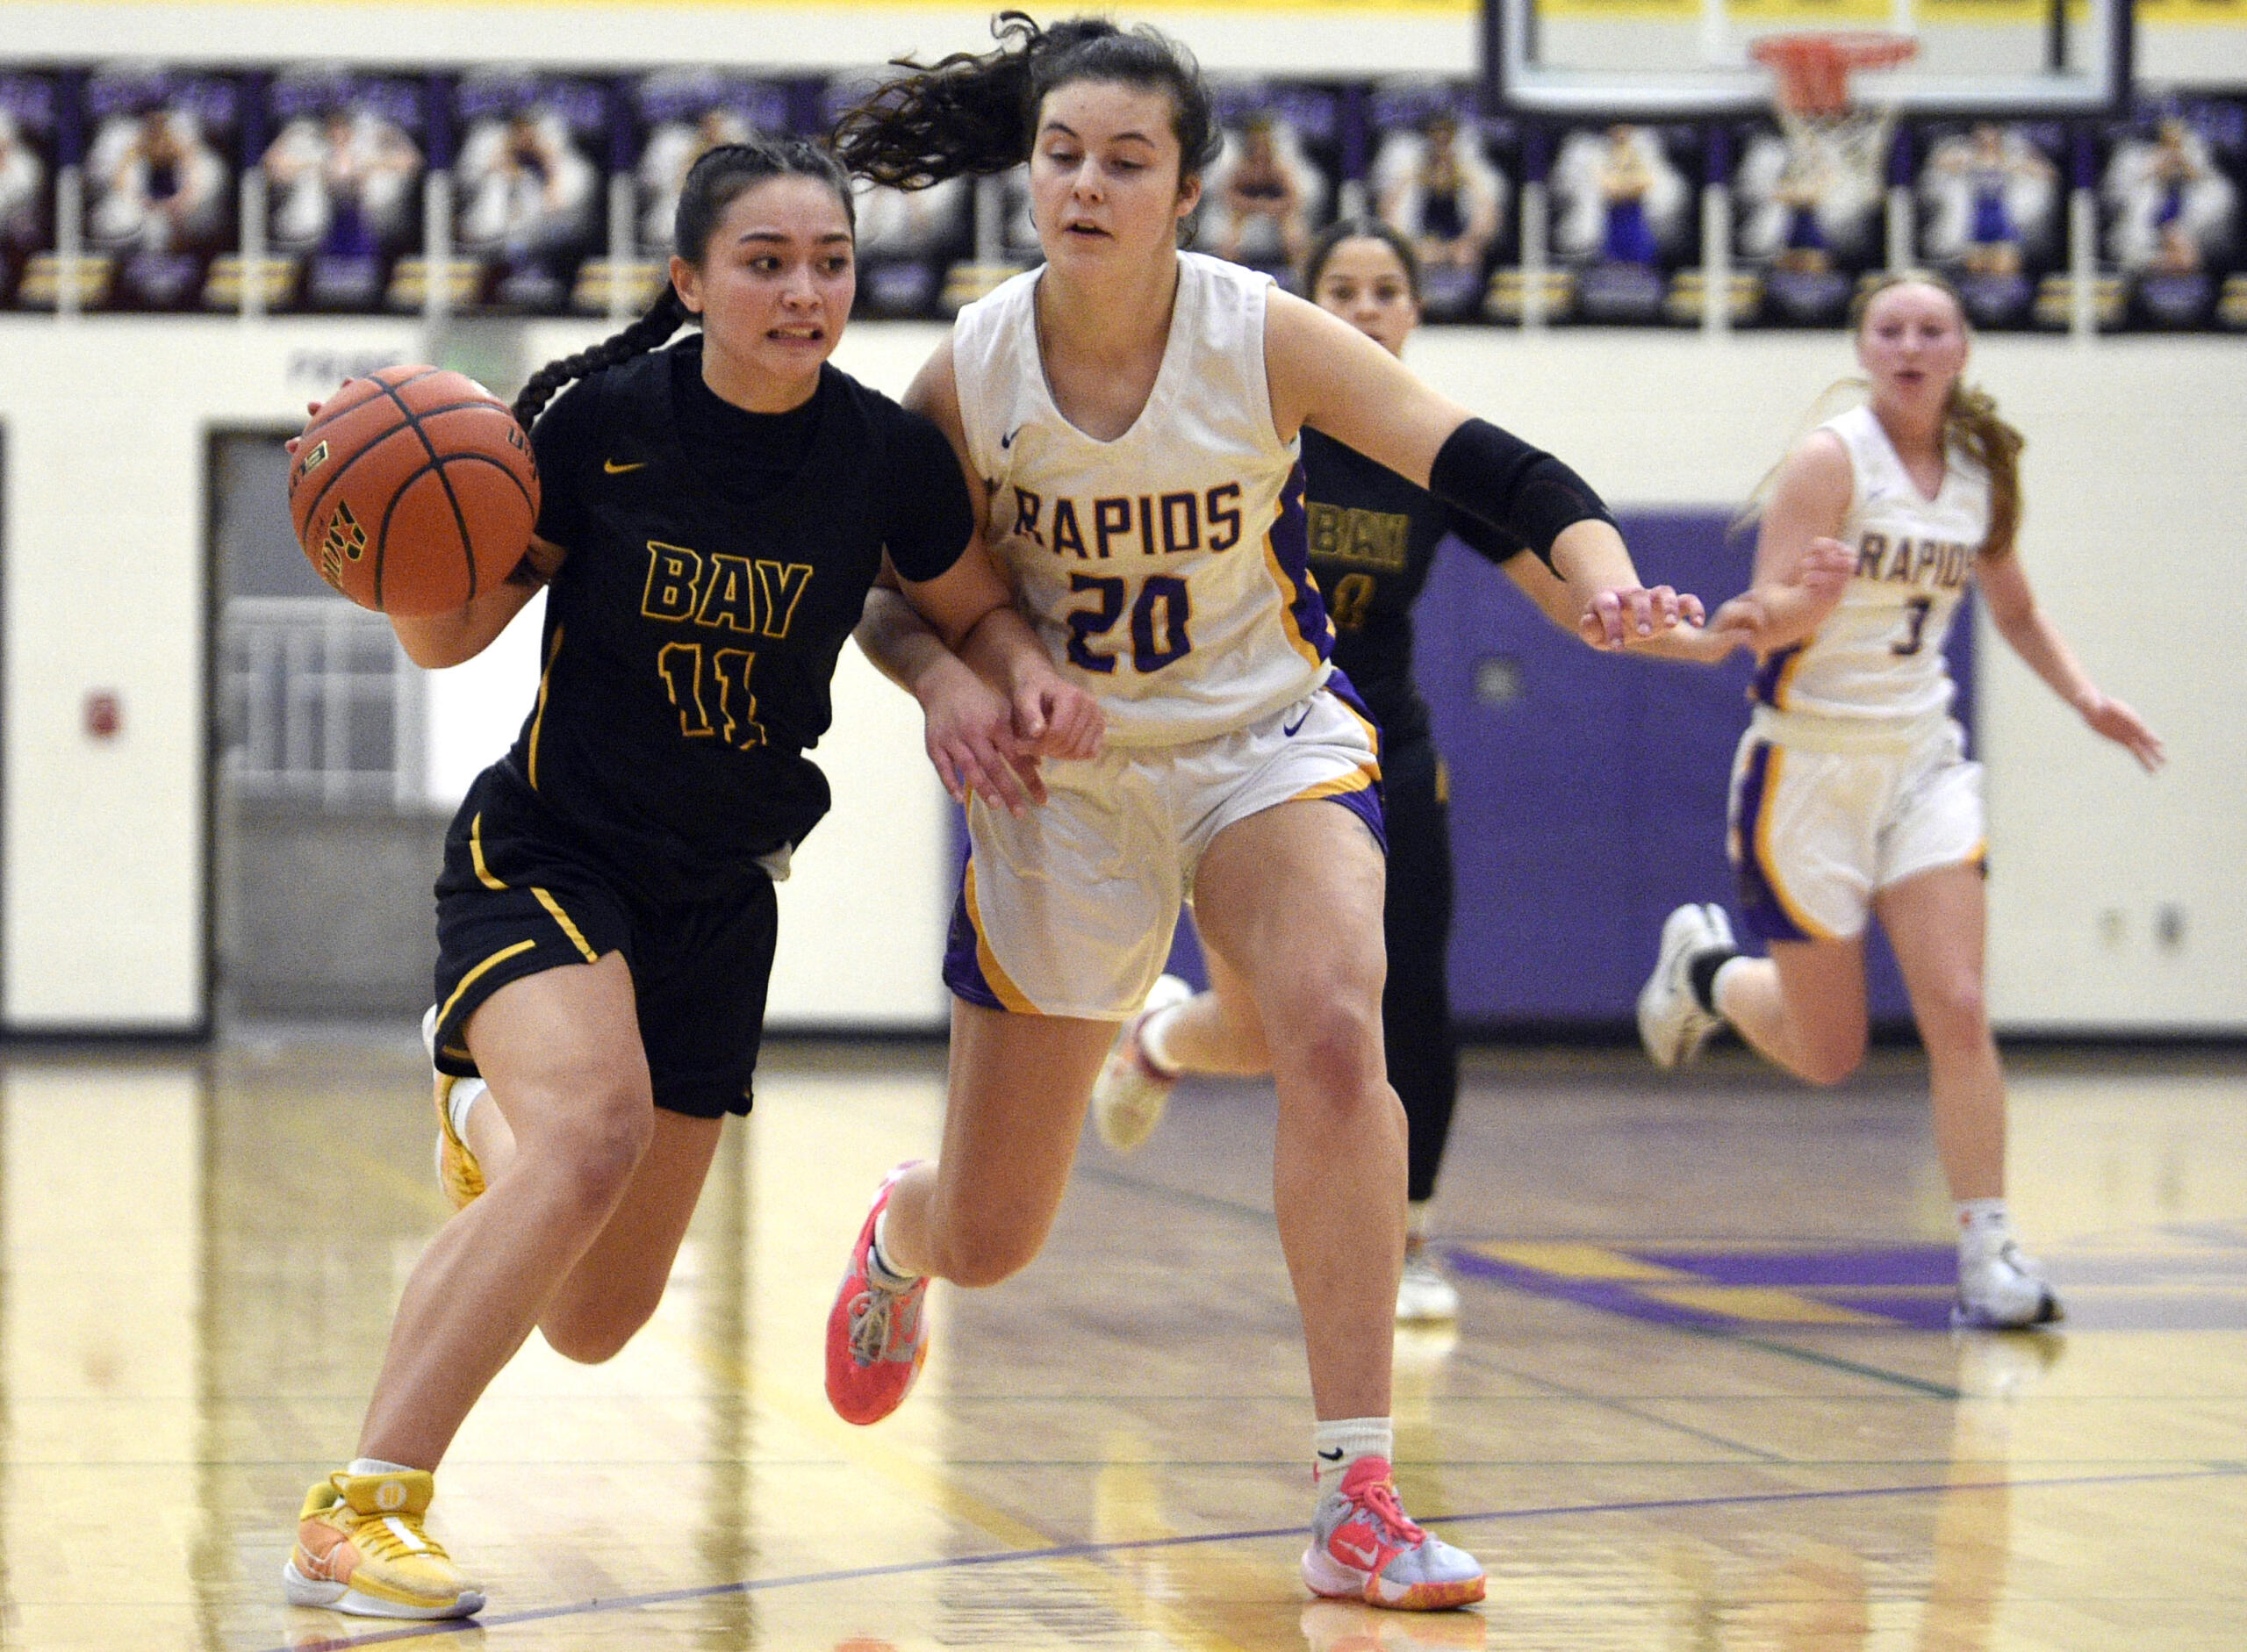 Hudson’s Bay’s Olivia Carroll (11) tries to get past Columbia River’s Emma Iniguez (20) on a drive during a 2A GSHL girls basketball game on Wednesday, Jan. 3, 2024, at Columbia River High School.